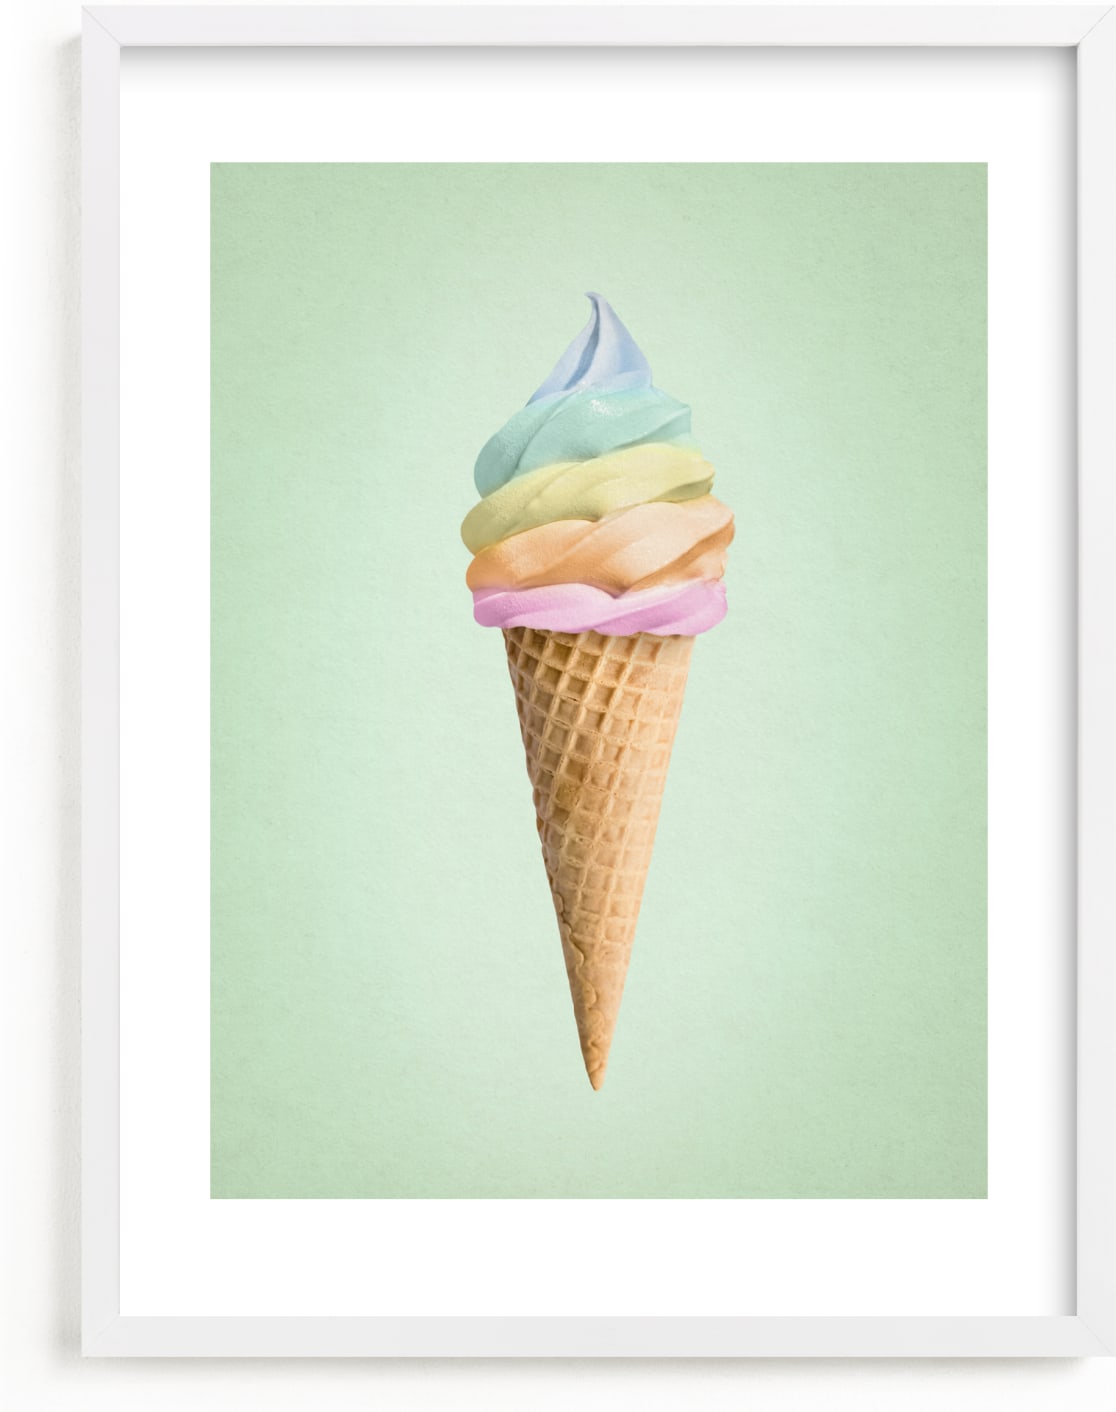 This is a green art by Paola Benenati called Rainbow Ice Cream.